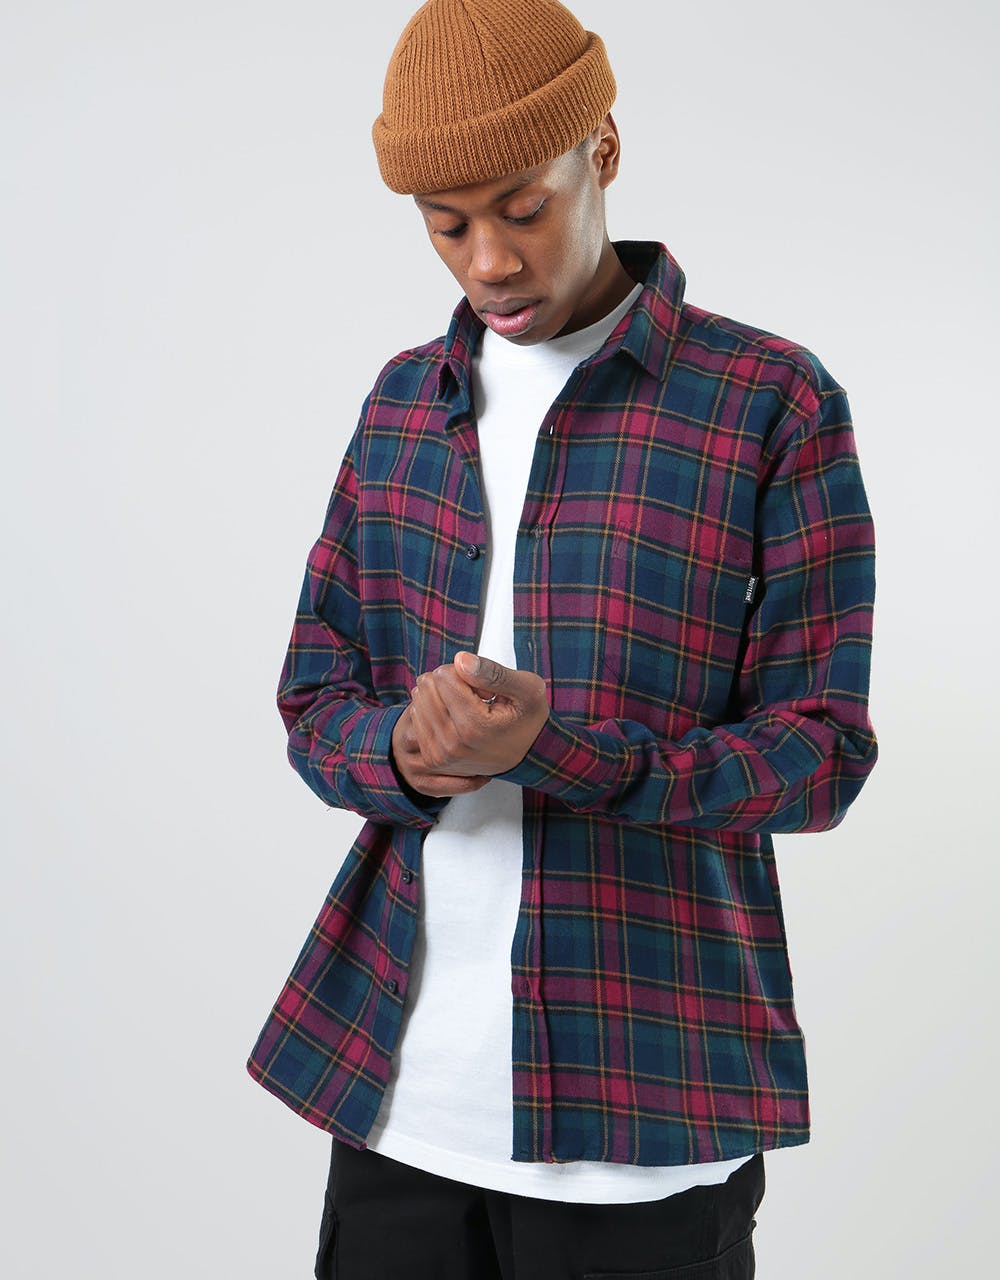 Route One Checked Flannel Shirt - Burgundy